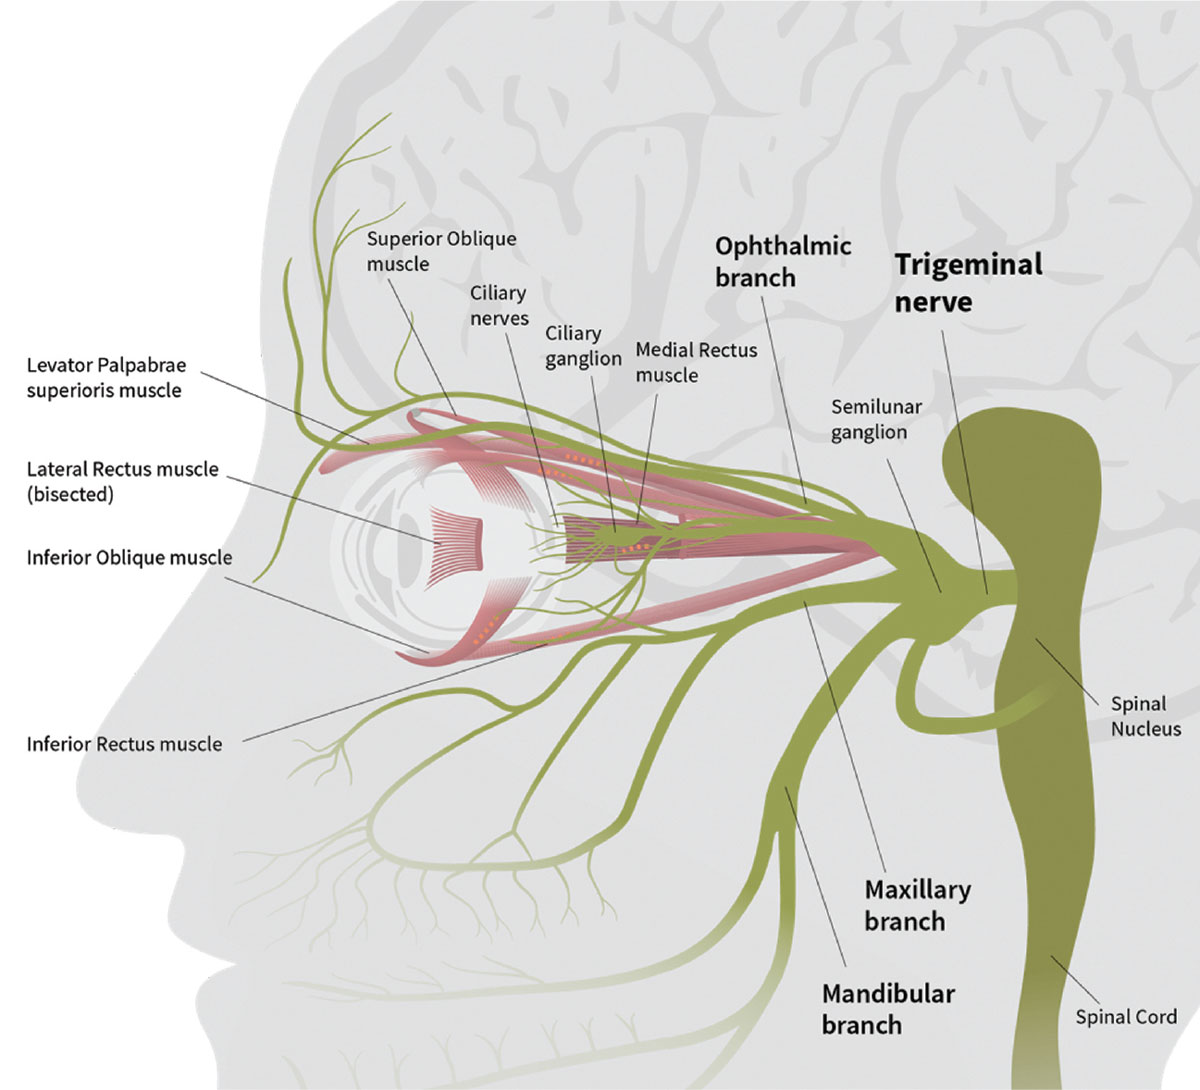 Research now suggests specialized lenses can help patients overcome symptoms of dysfunction of the ophthalmic branch of the trigeminal nerve, trigeminal dysphoria.